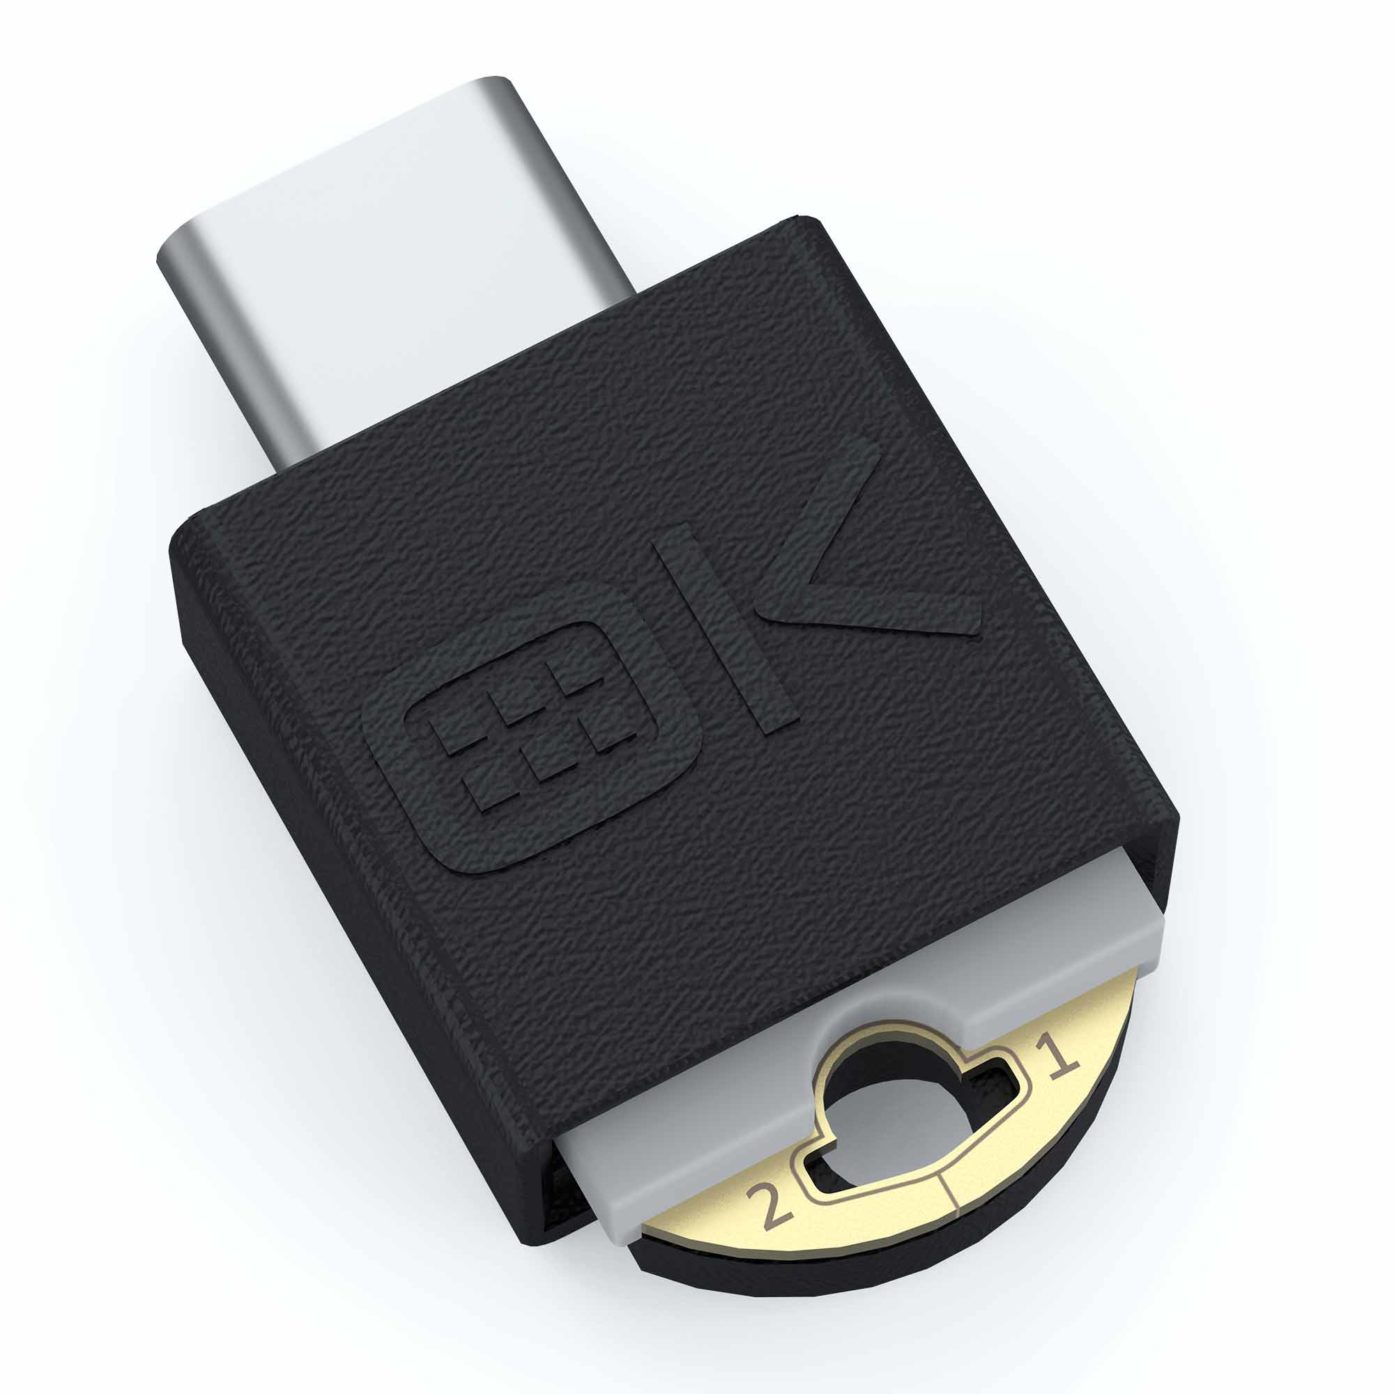 OnlyKey DUO is the digital password key that keeps your devices protected.